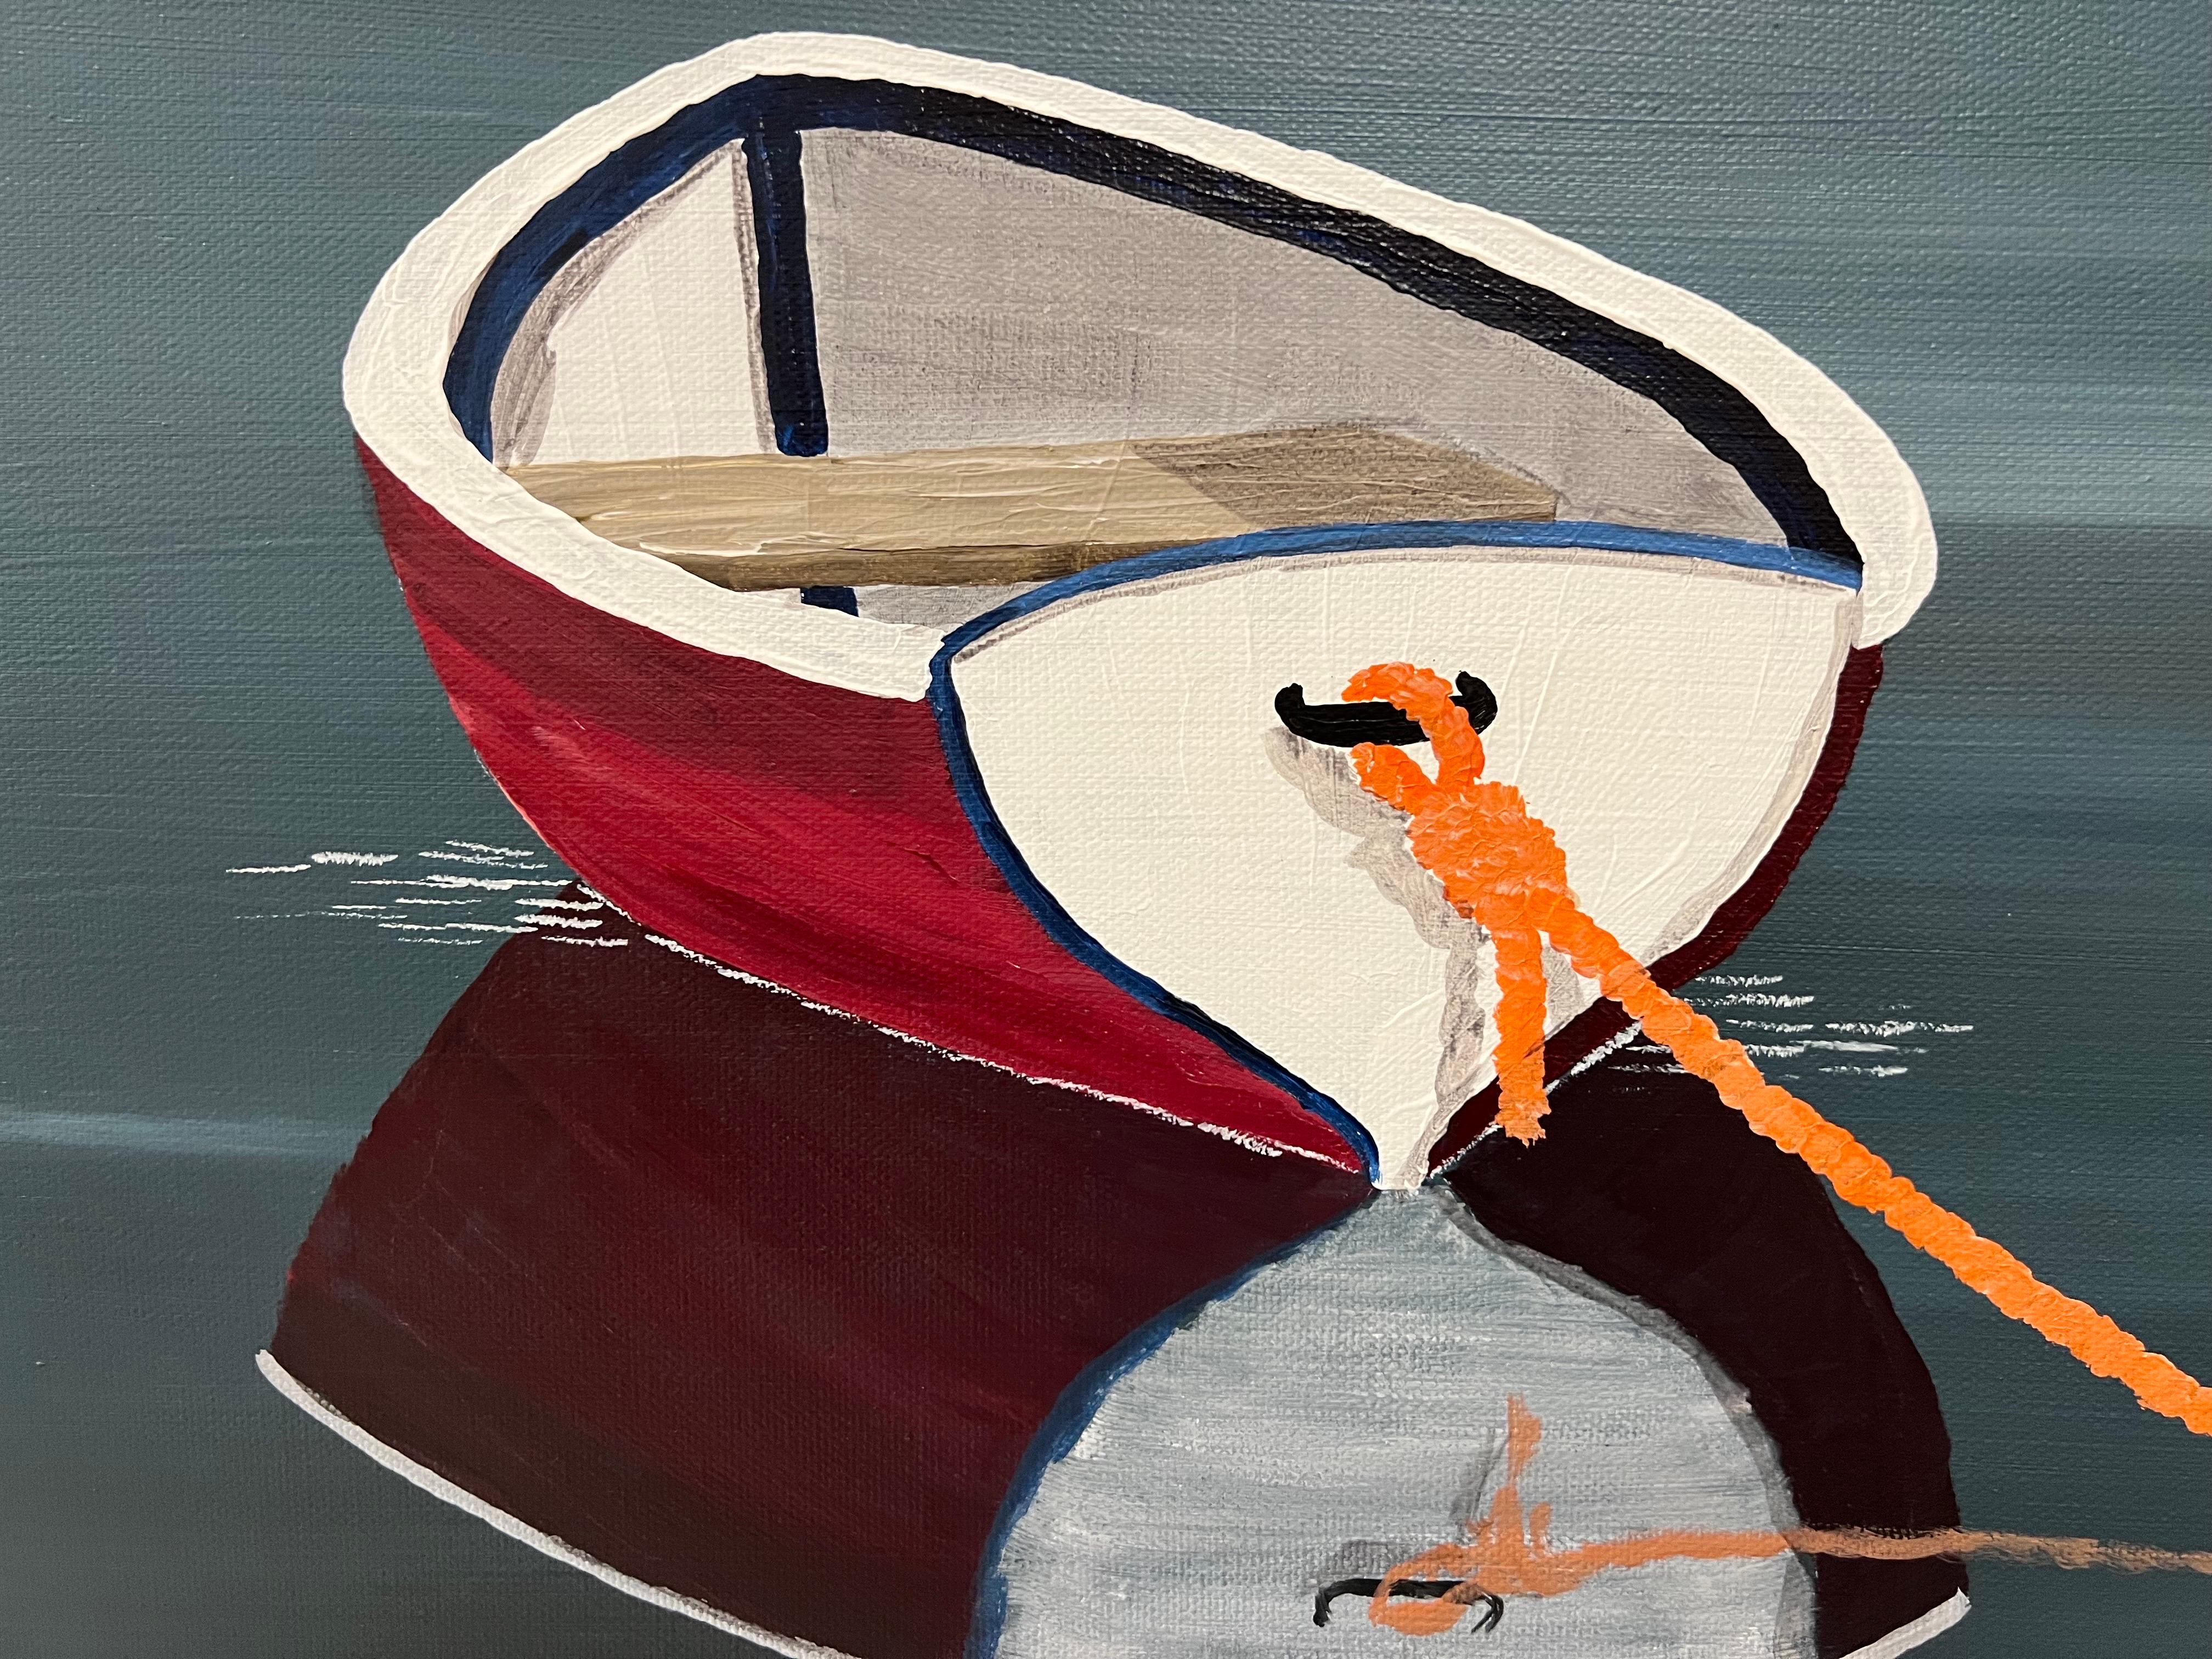 Still Waters by Susan Kinsella, Boat with Orange Acrylic on Canvas Painting 2